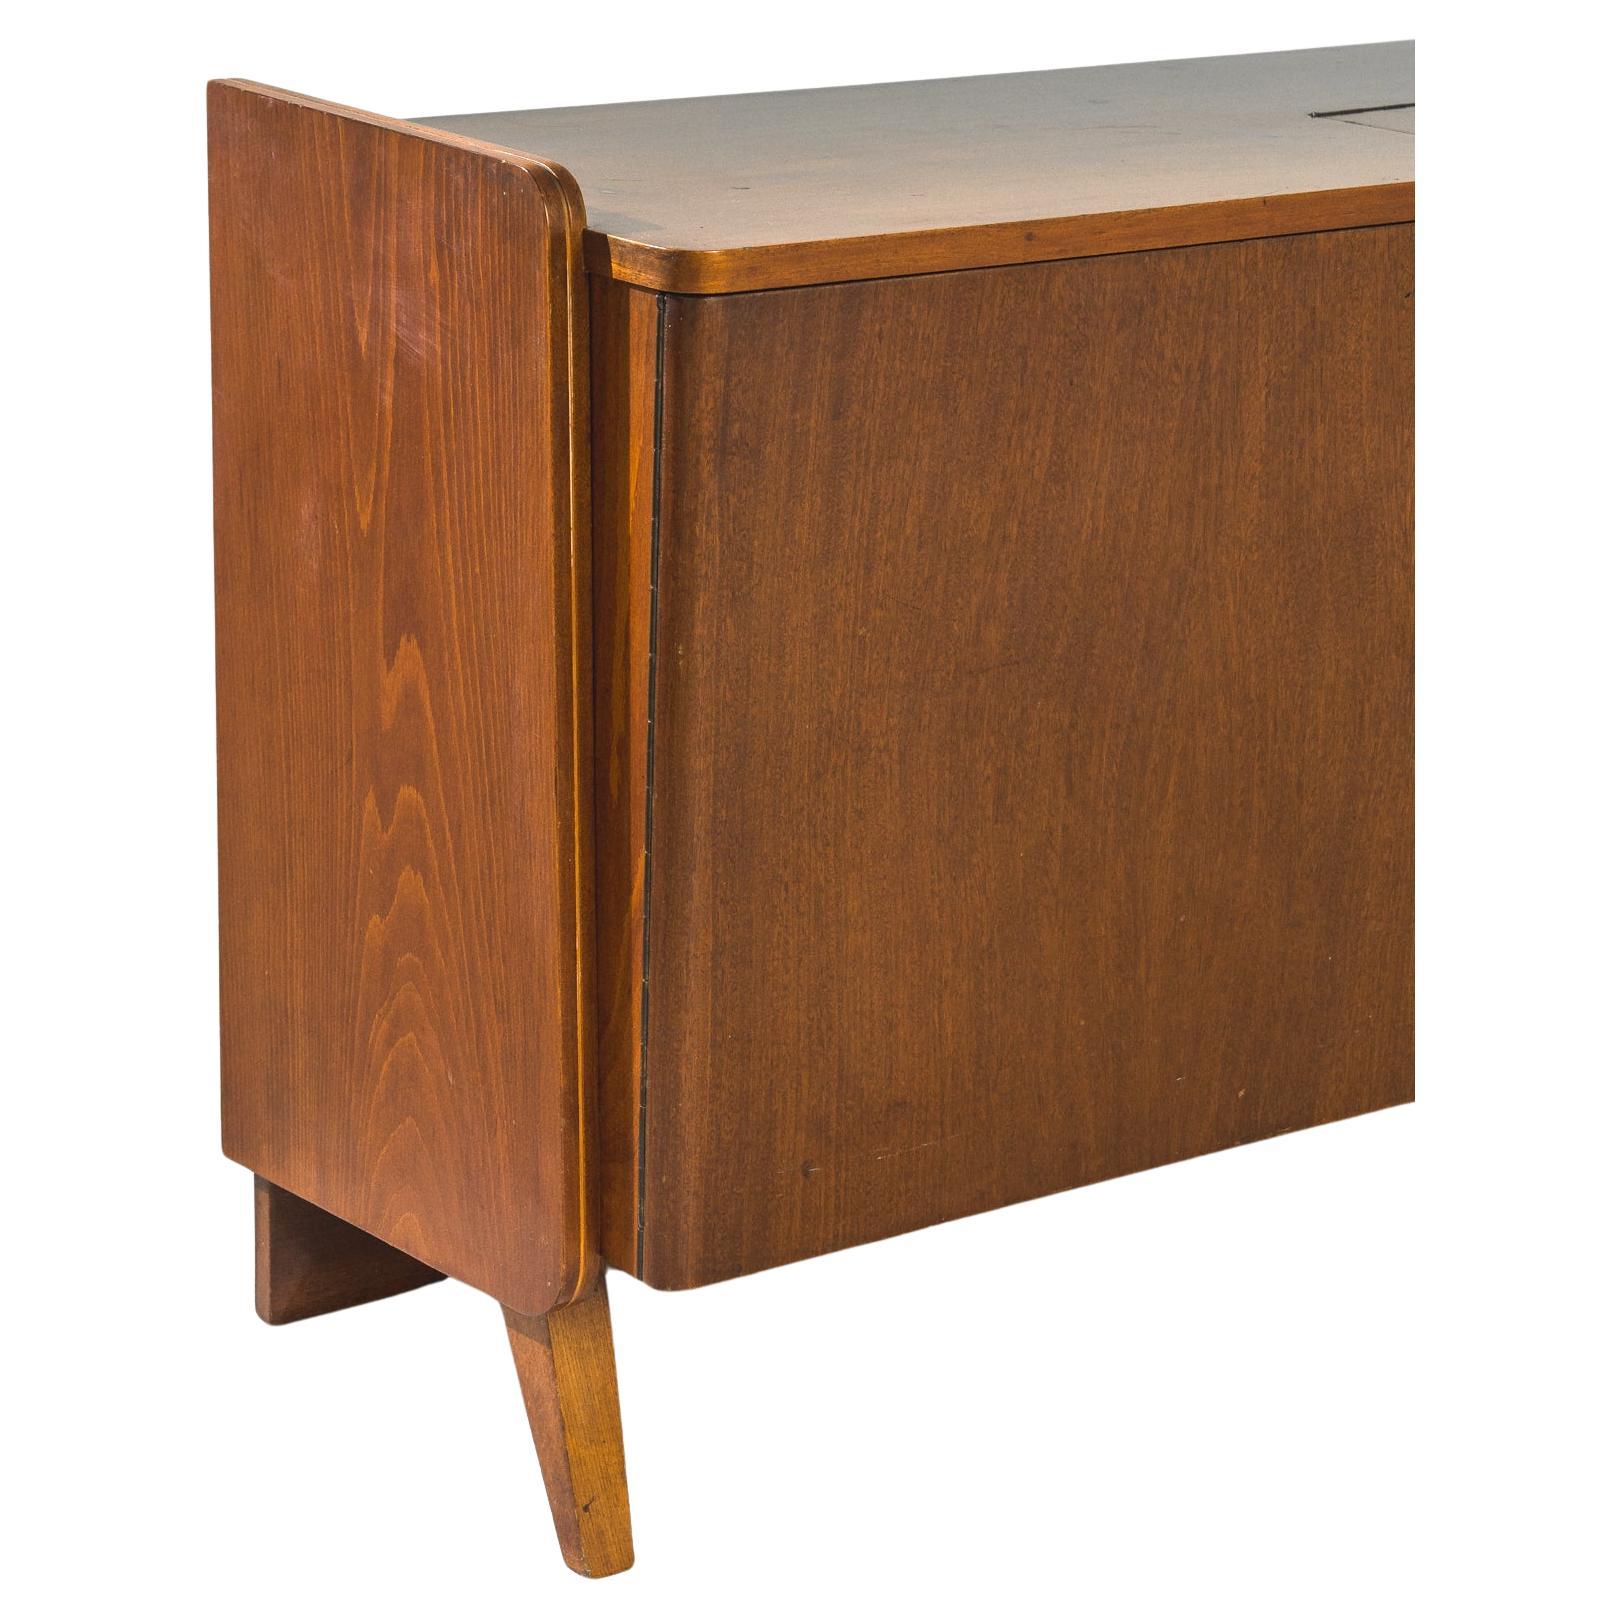 In the dynamic design landscape of 1960s Czechoslovakia, Tatra Furniture Company emerged as a hallmark of innovation and craftsmanship. This wooden sideboard, crafted by Tatra during that era, epitomizes the company's commitment to sleek modern